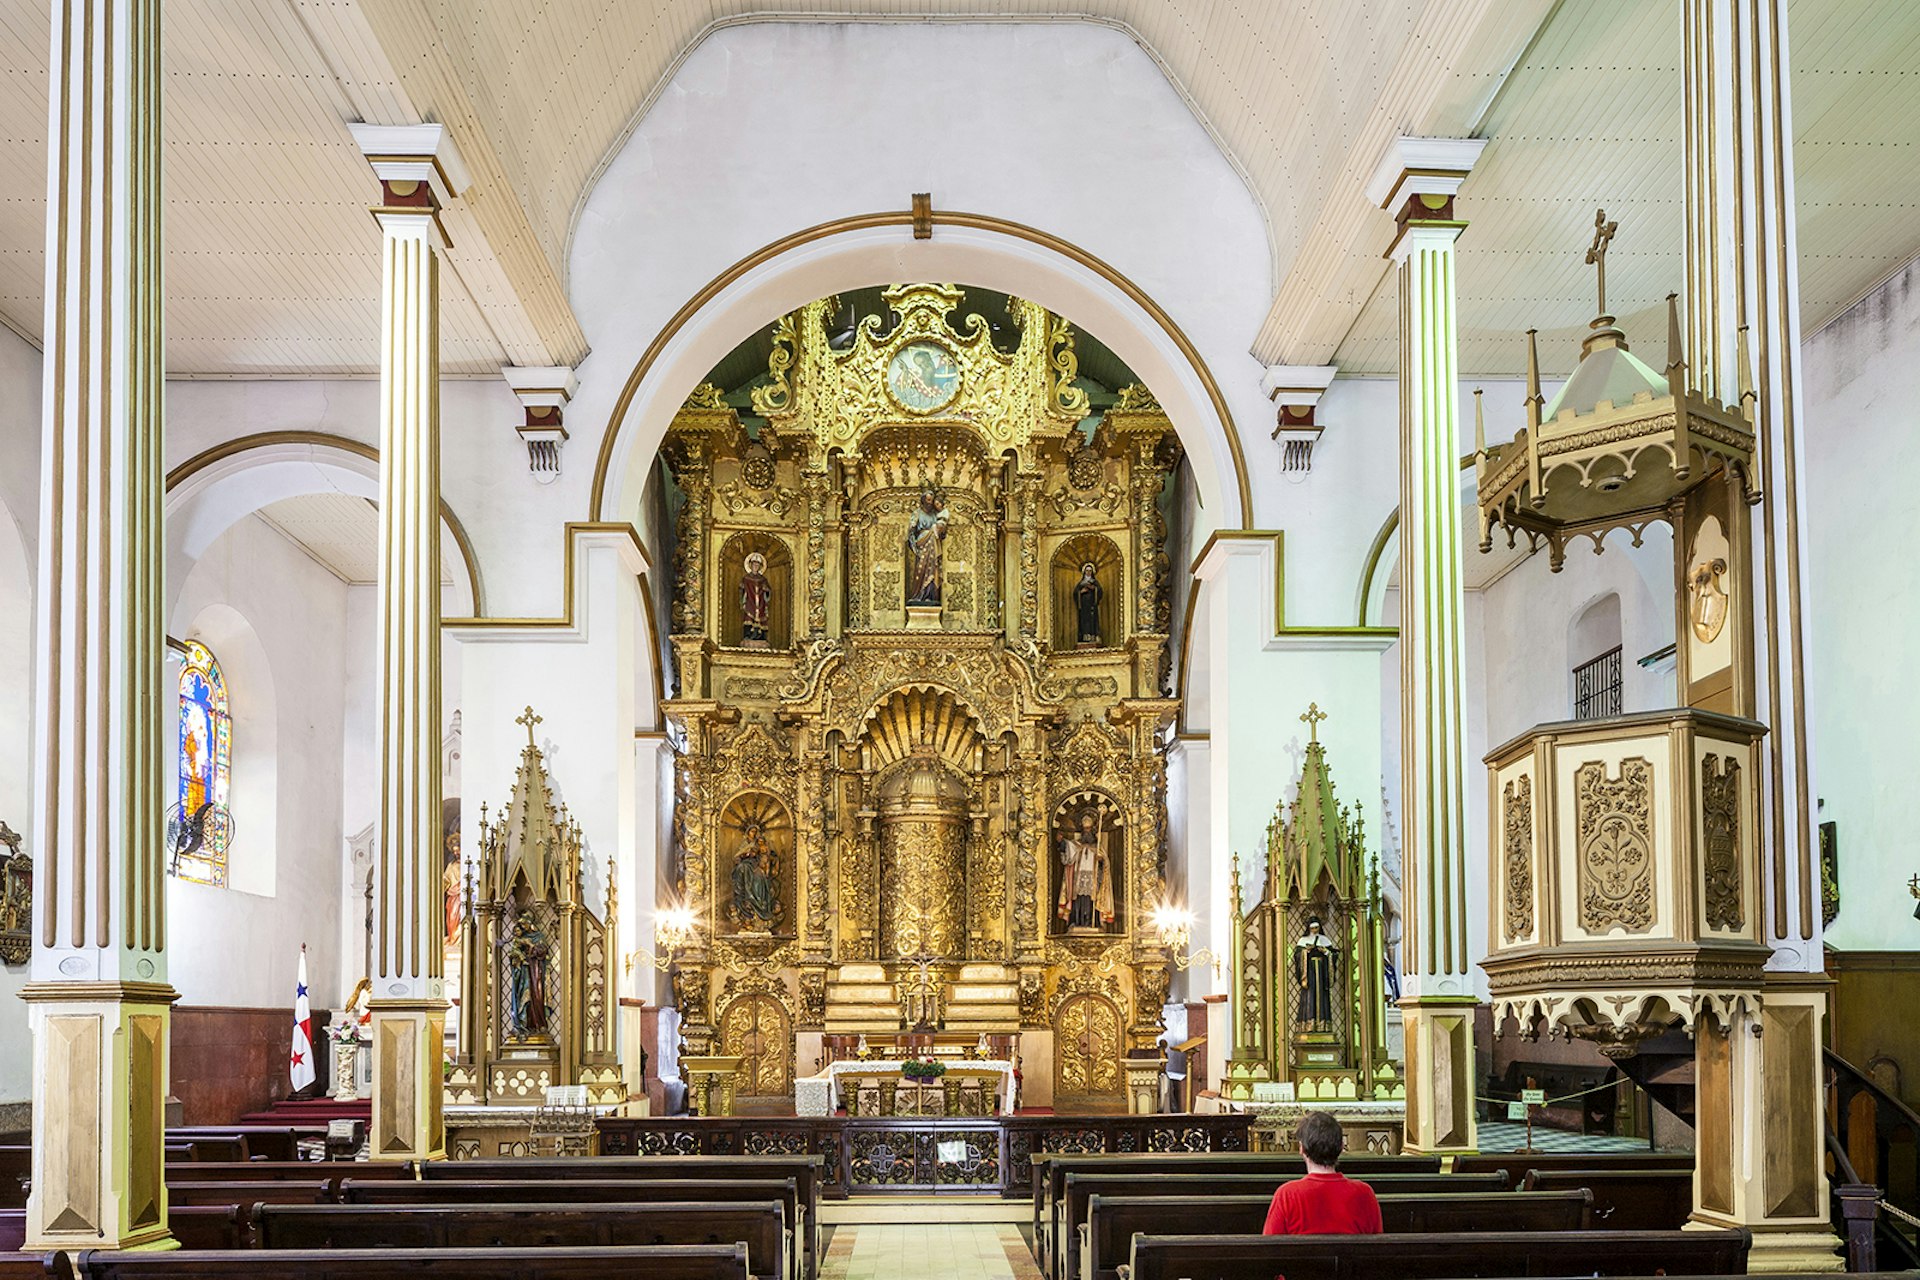 Features - Panama, Panama City, Plaza Independencia, historic district listed as World Heritage by UNESCO, Casco Viejo district, Barrio San Felipe, San Jose Church from 1677 and its gilded altar with gold leaf Baroque